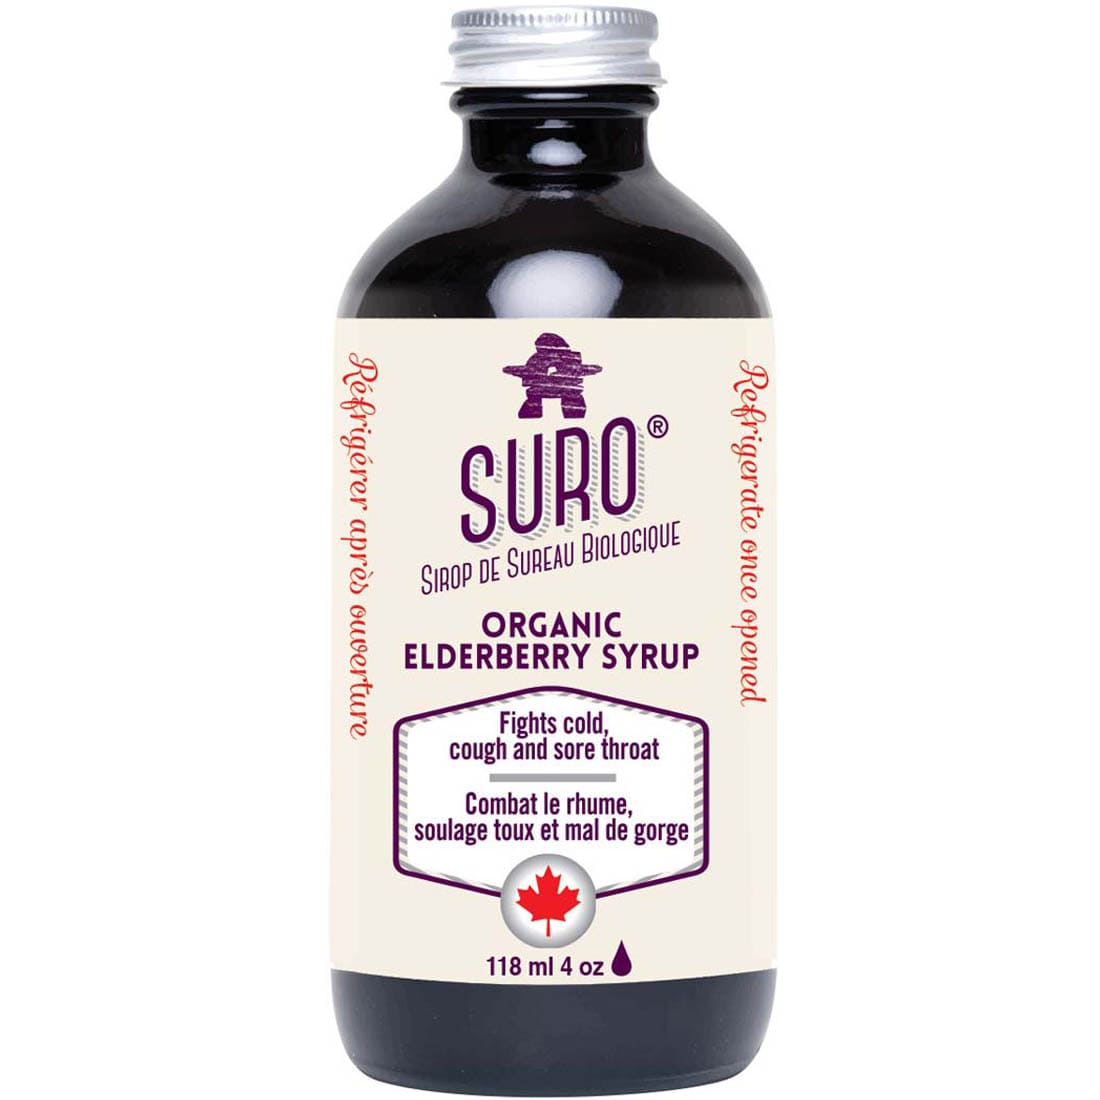 Elderberry syrup for colds